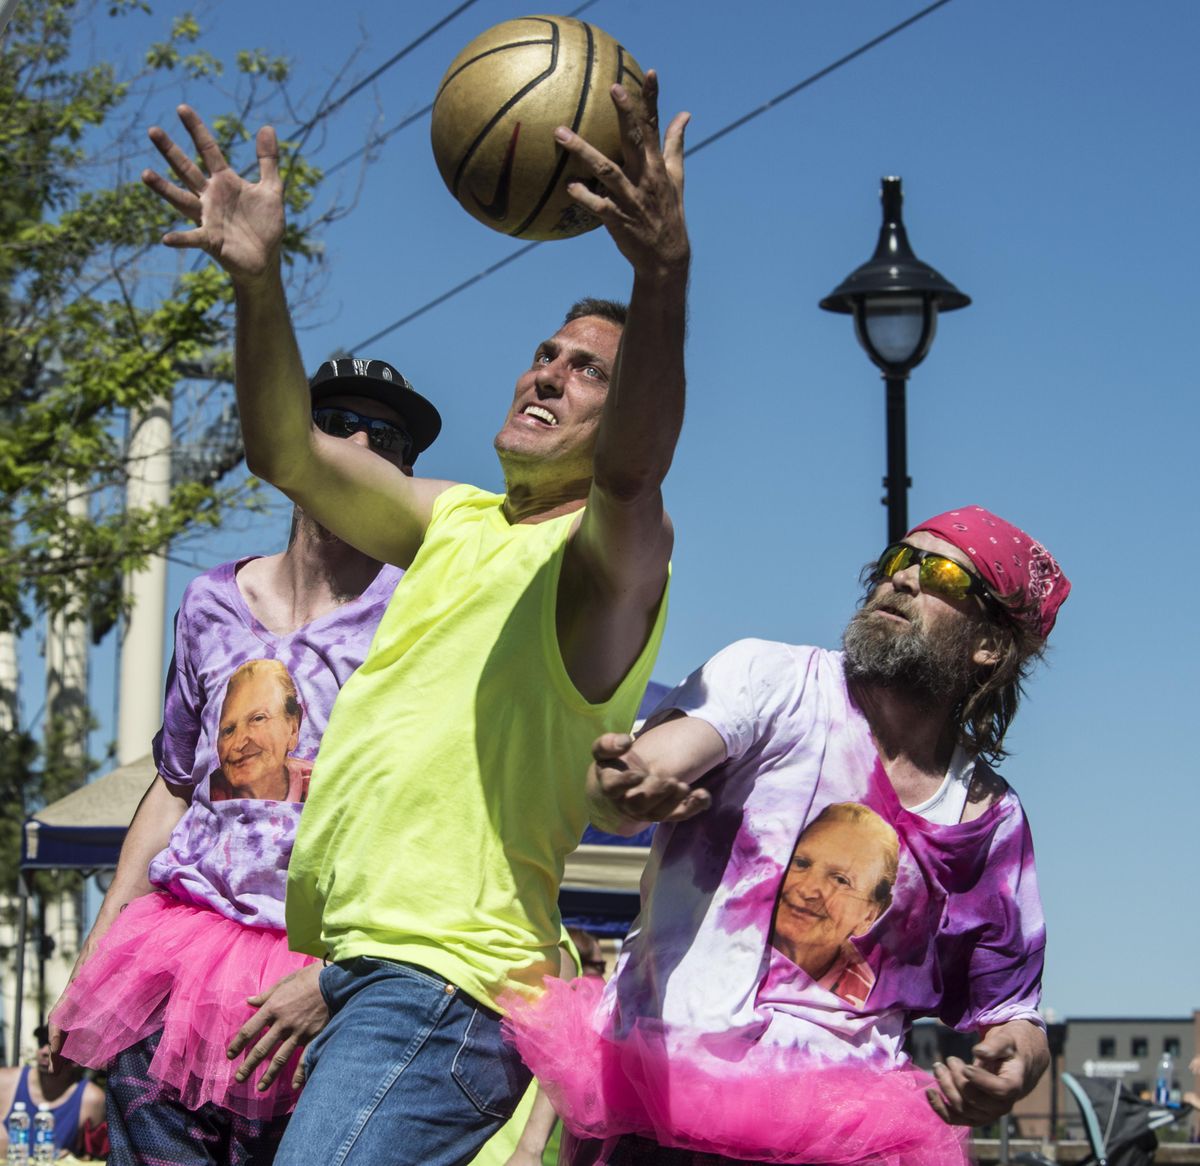 Hank Hendriksen, center of the Gonzaga Bulldogs, battles David Emerson, left, and Chris Banning of the Mamas Boyz for a rebound during a Hoopfest game, June 24, 2017, in the Special Olympics division. (Dan Pelle / The Spokesman-Review)